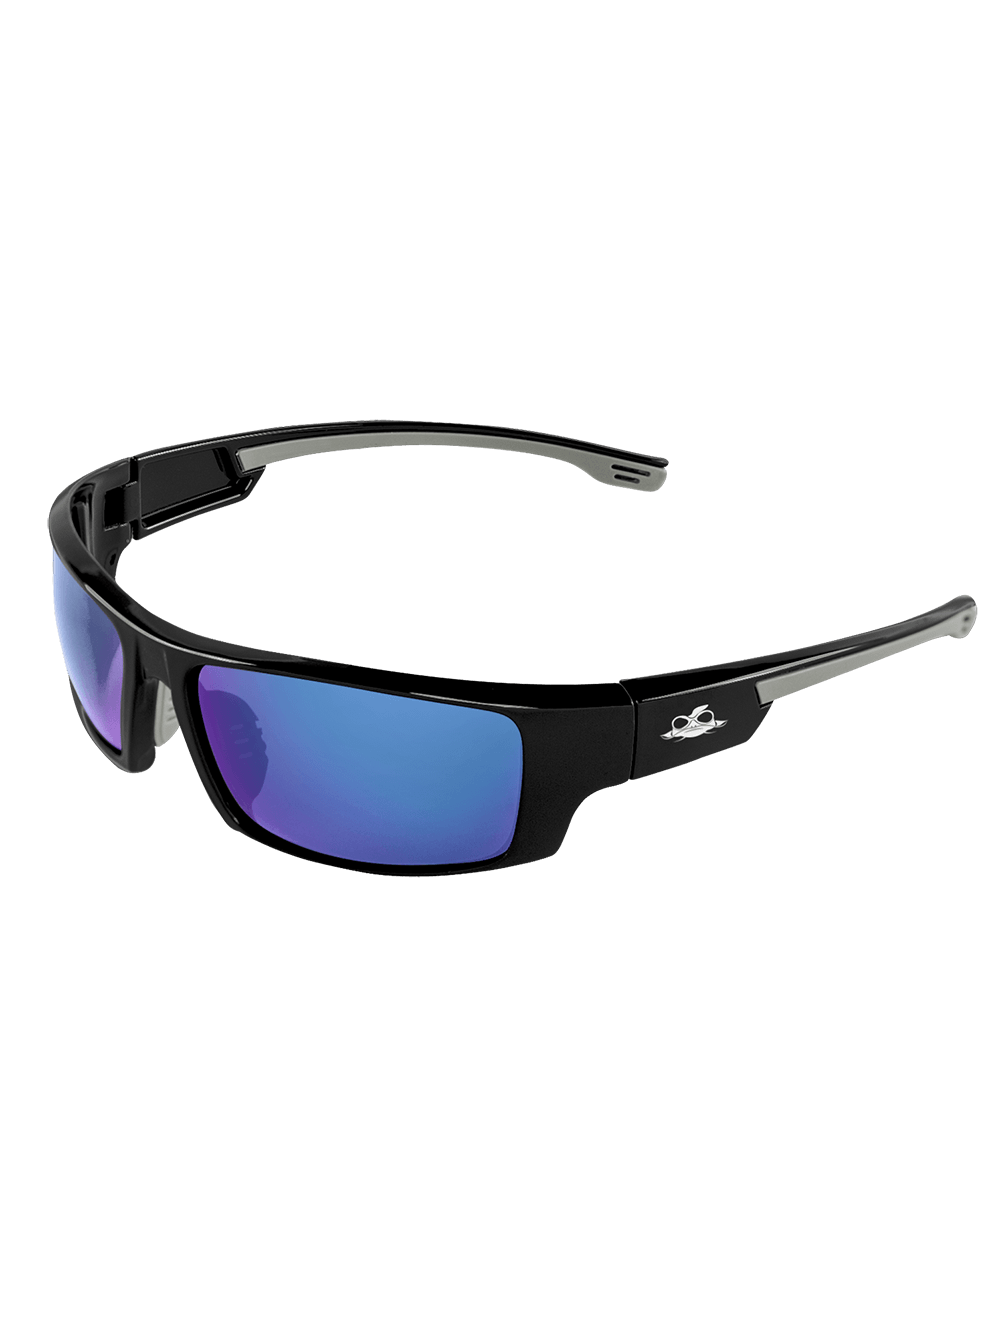 Polarized Safety Glasses - North American Safety